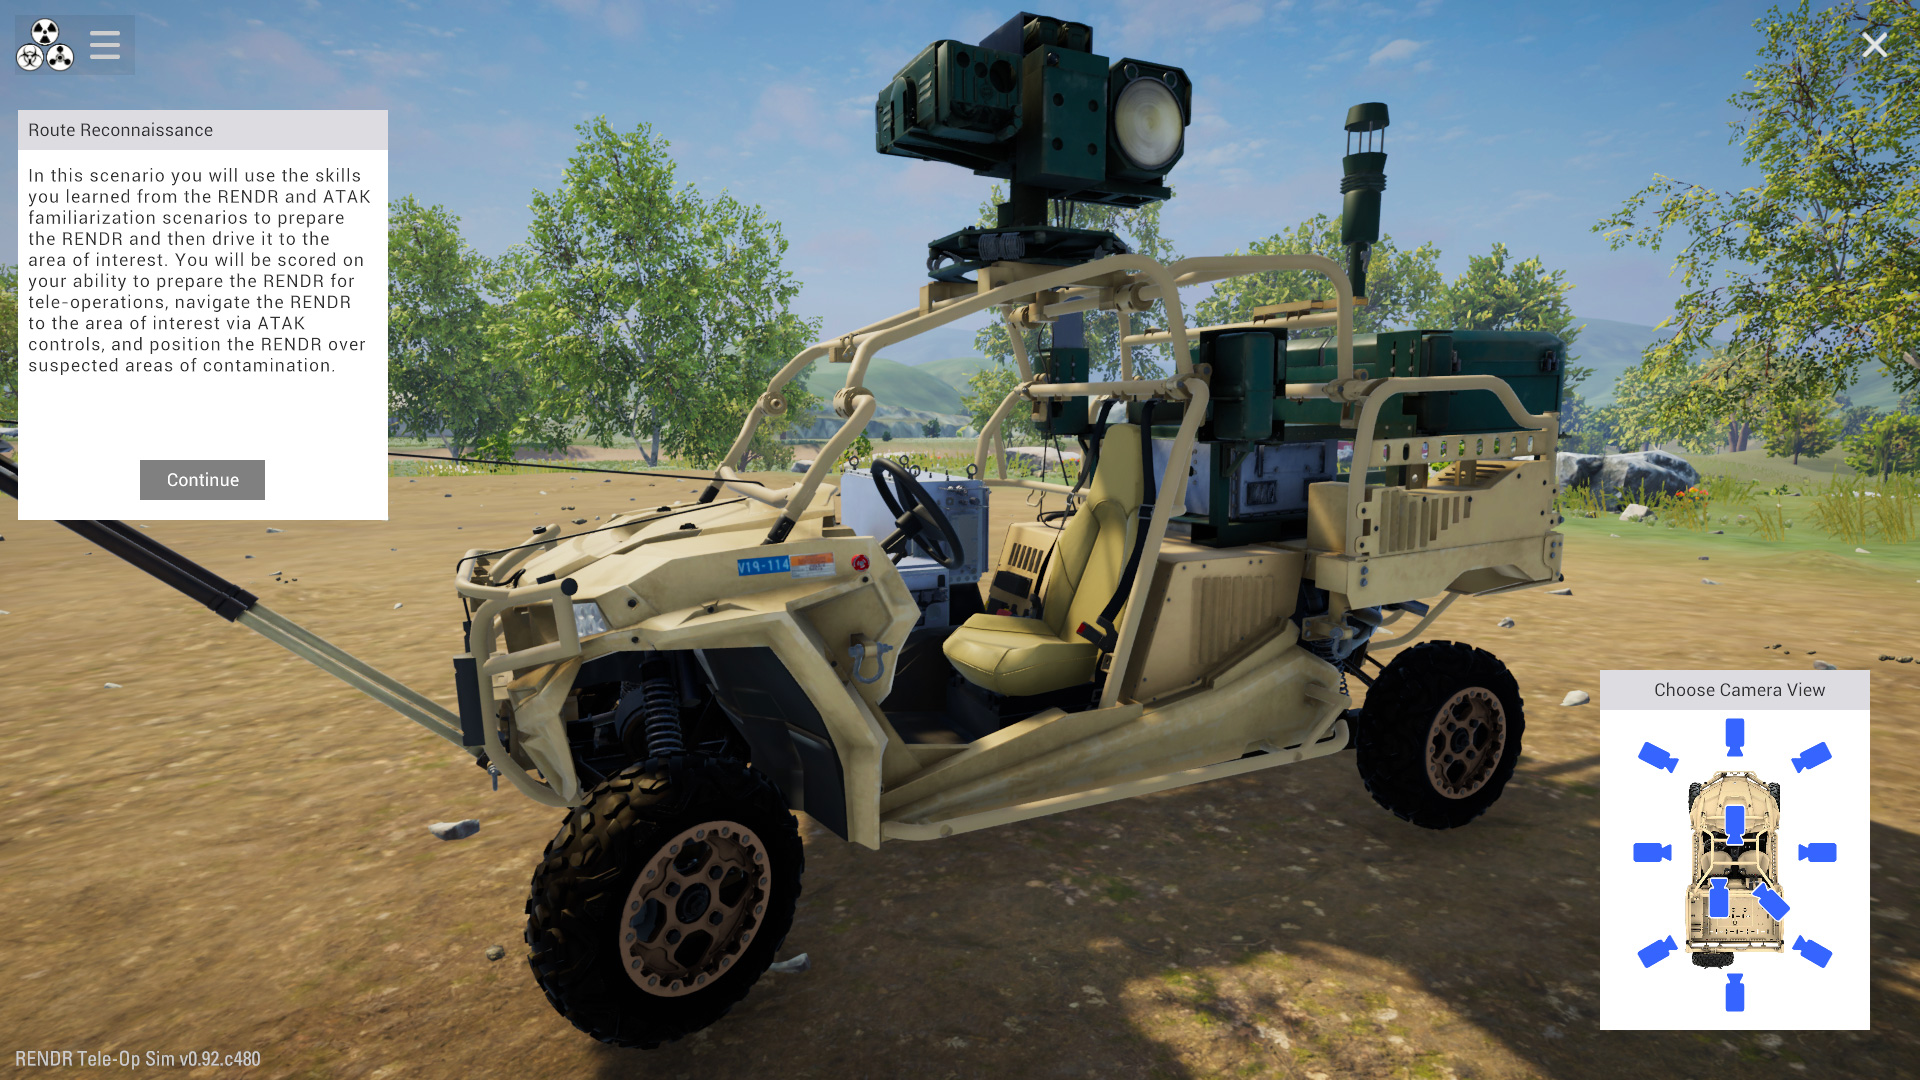 Unmanned Ground Vehicle Route Reconnaissance Training Simulator